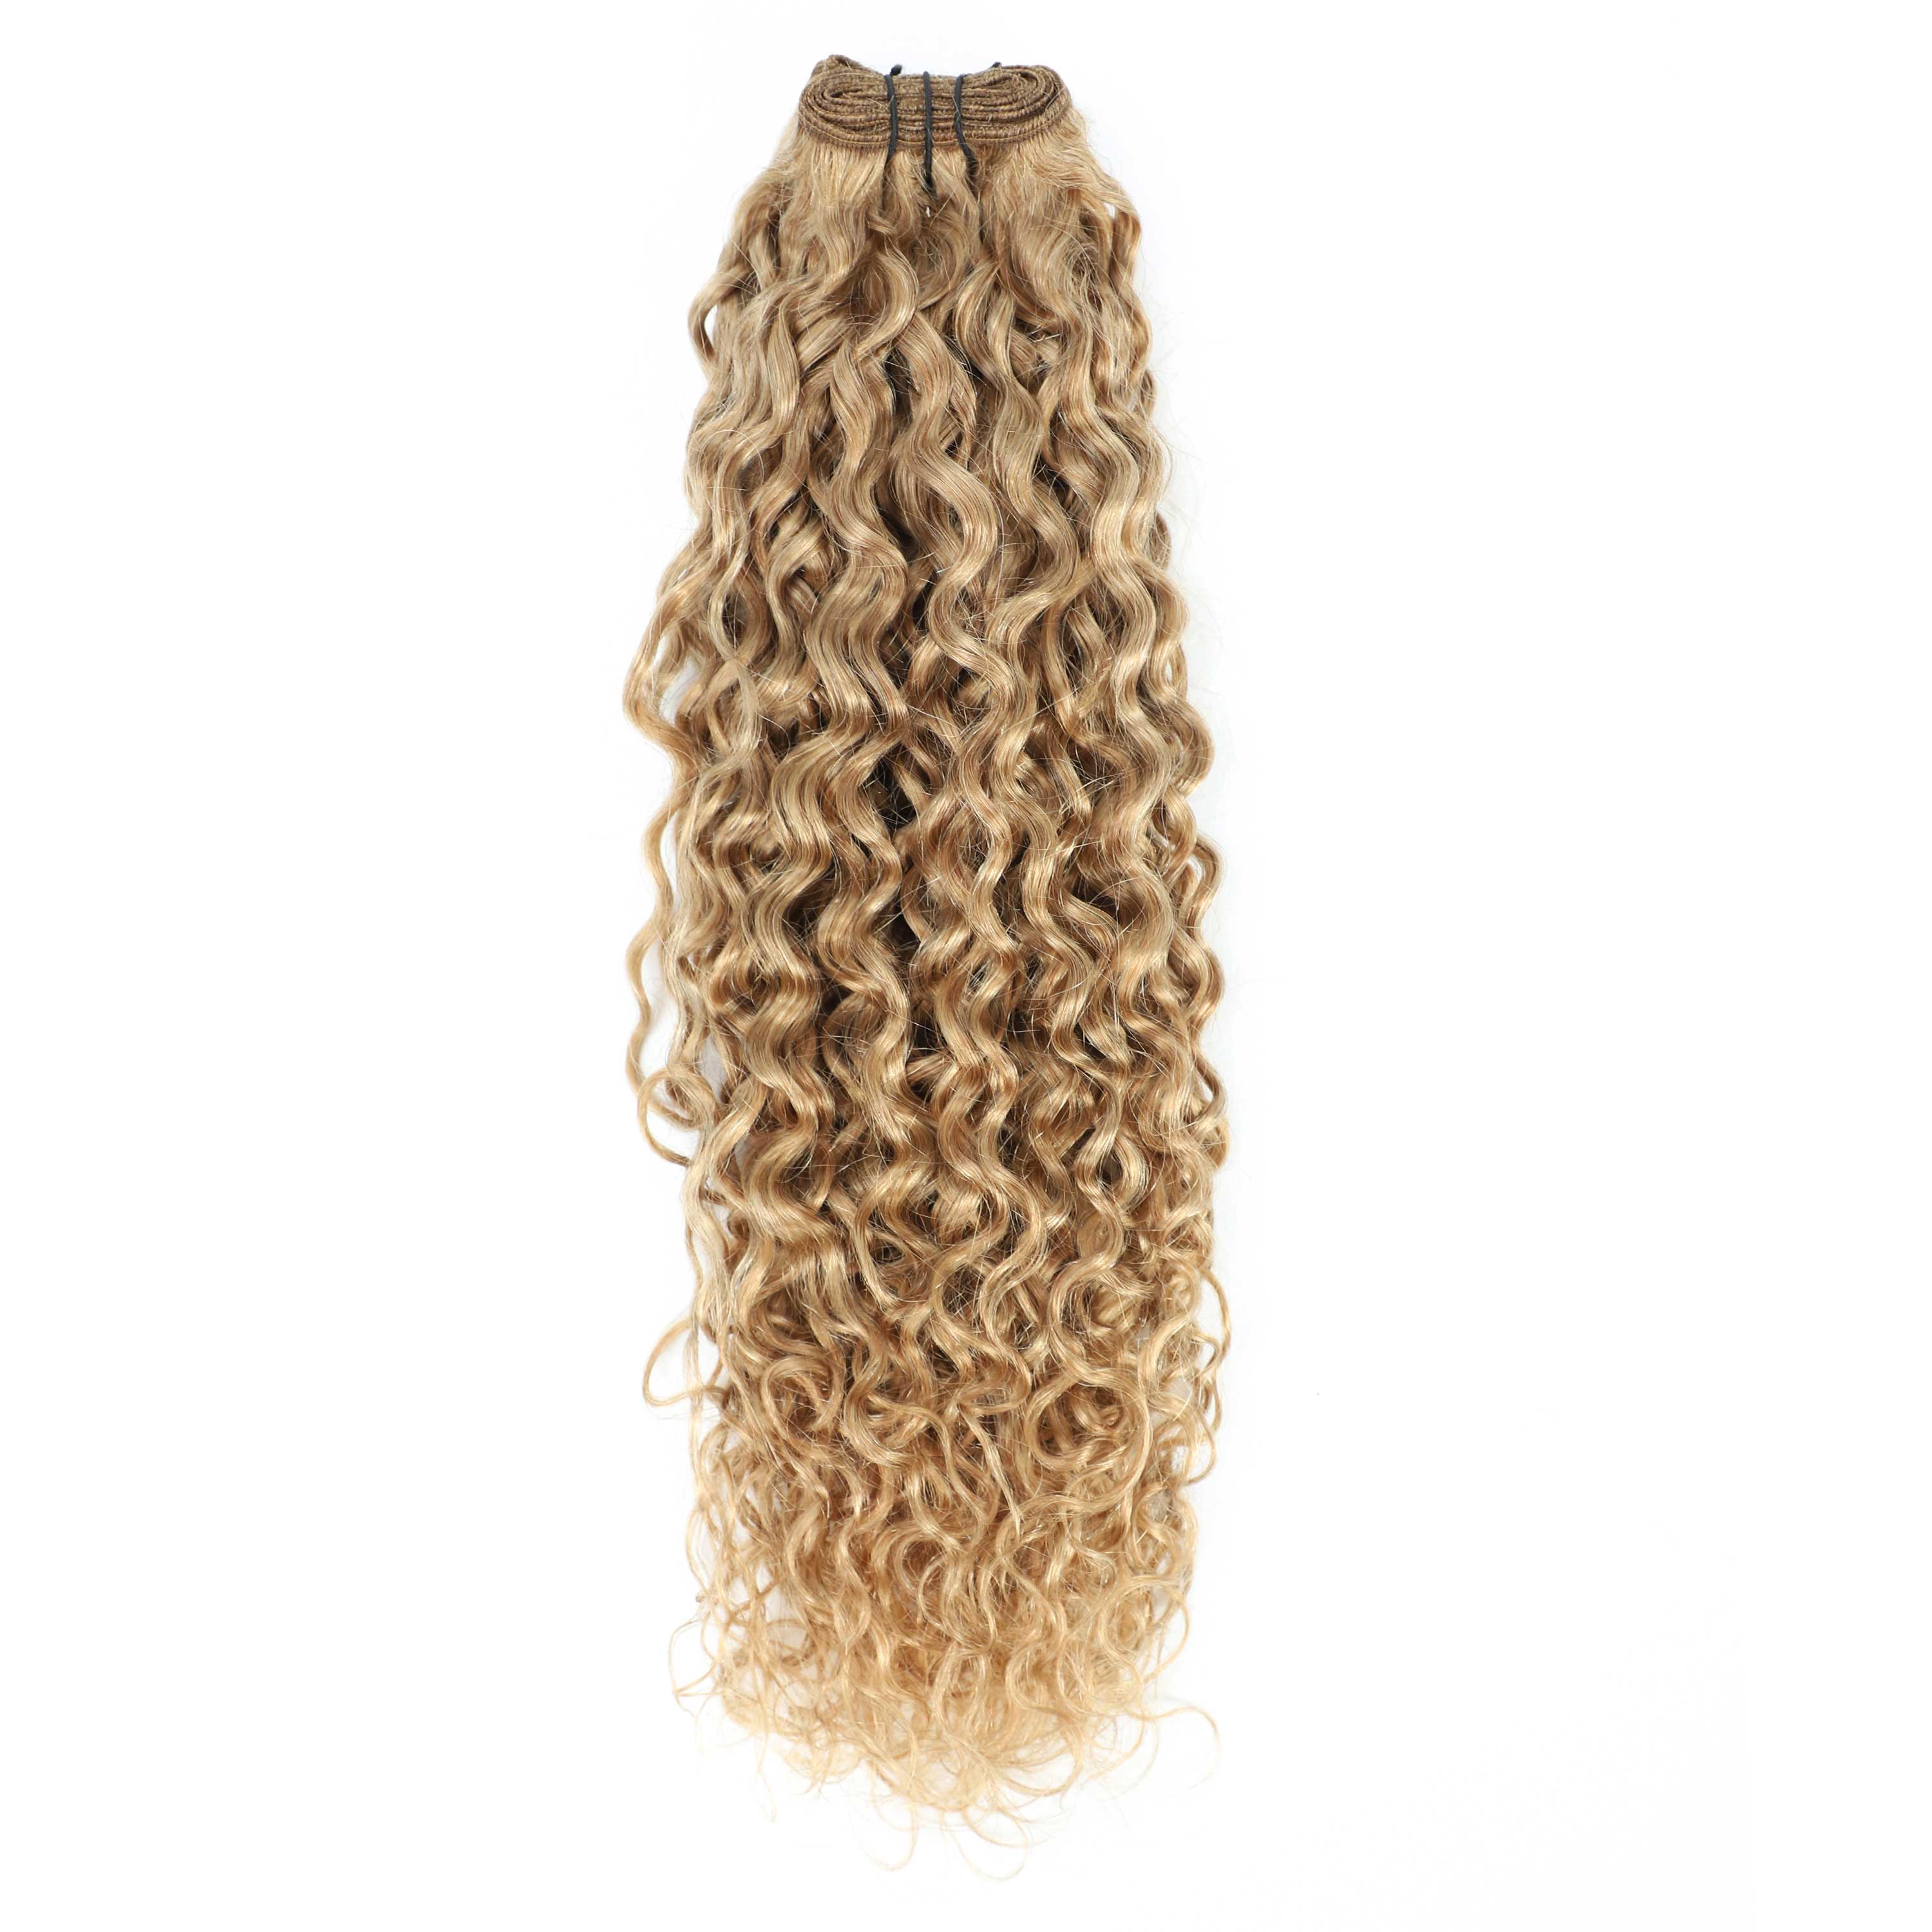 All Color Curly Hair Extensions at Best Price in Asansol  Sourav Hair  Enterprise